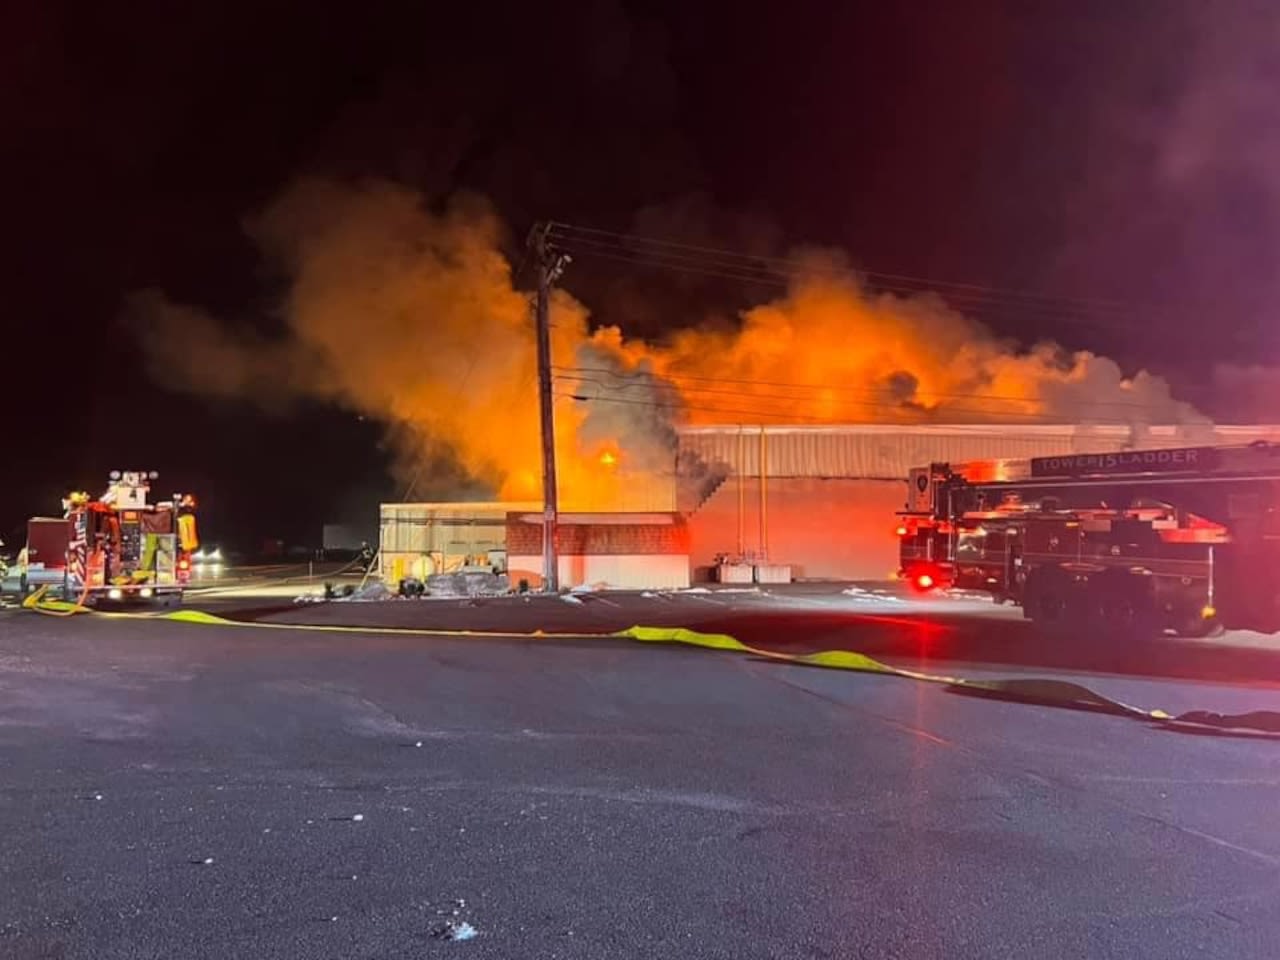 After Lancaster County market fire, its property goes on sale for nearly $10M